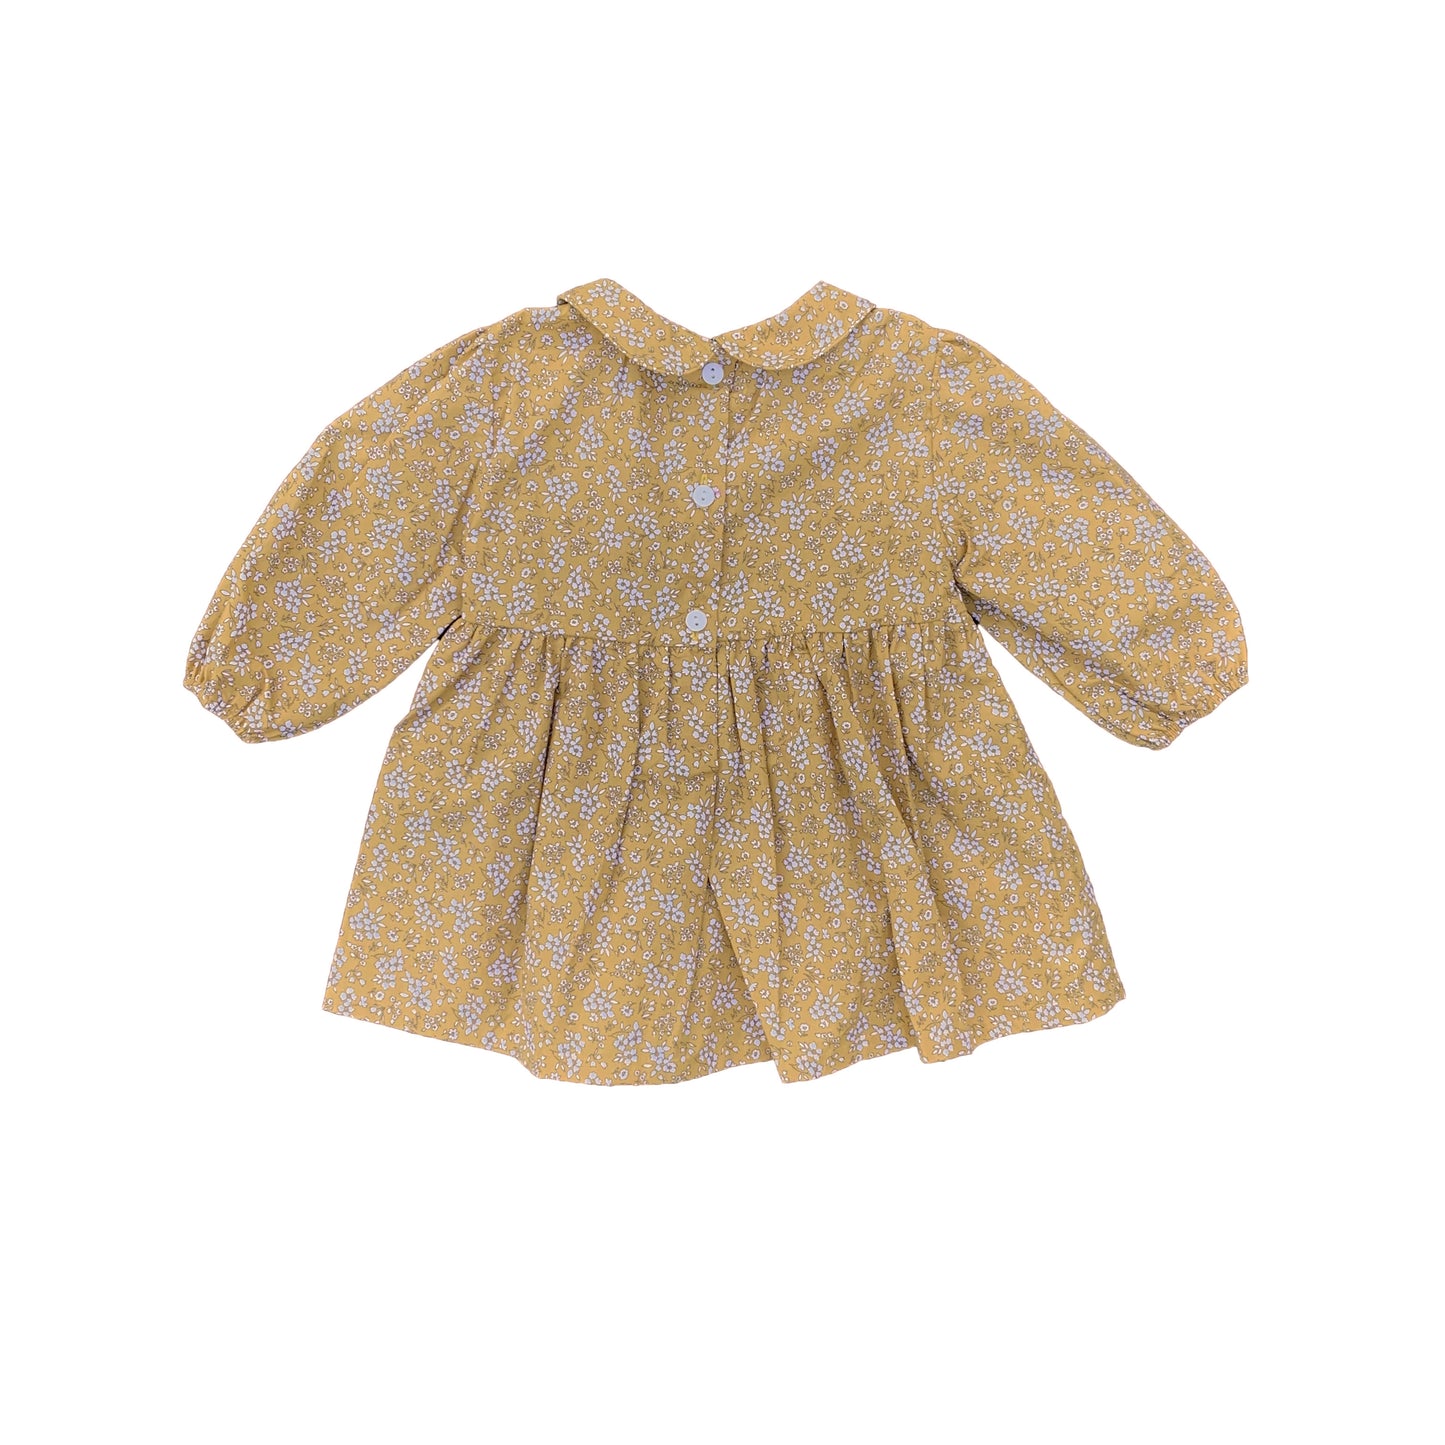 Long Sleeves Autumn Smocked Top.